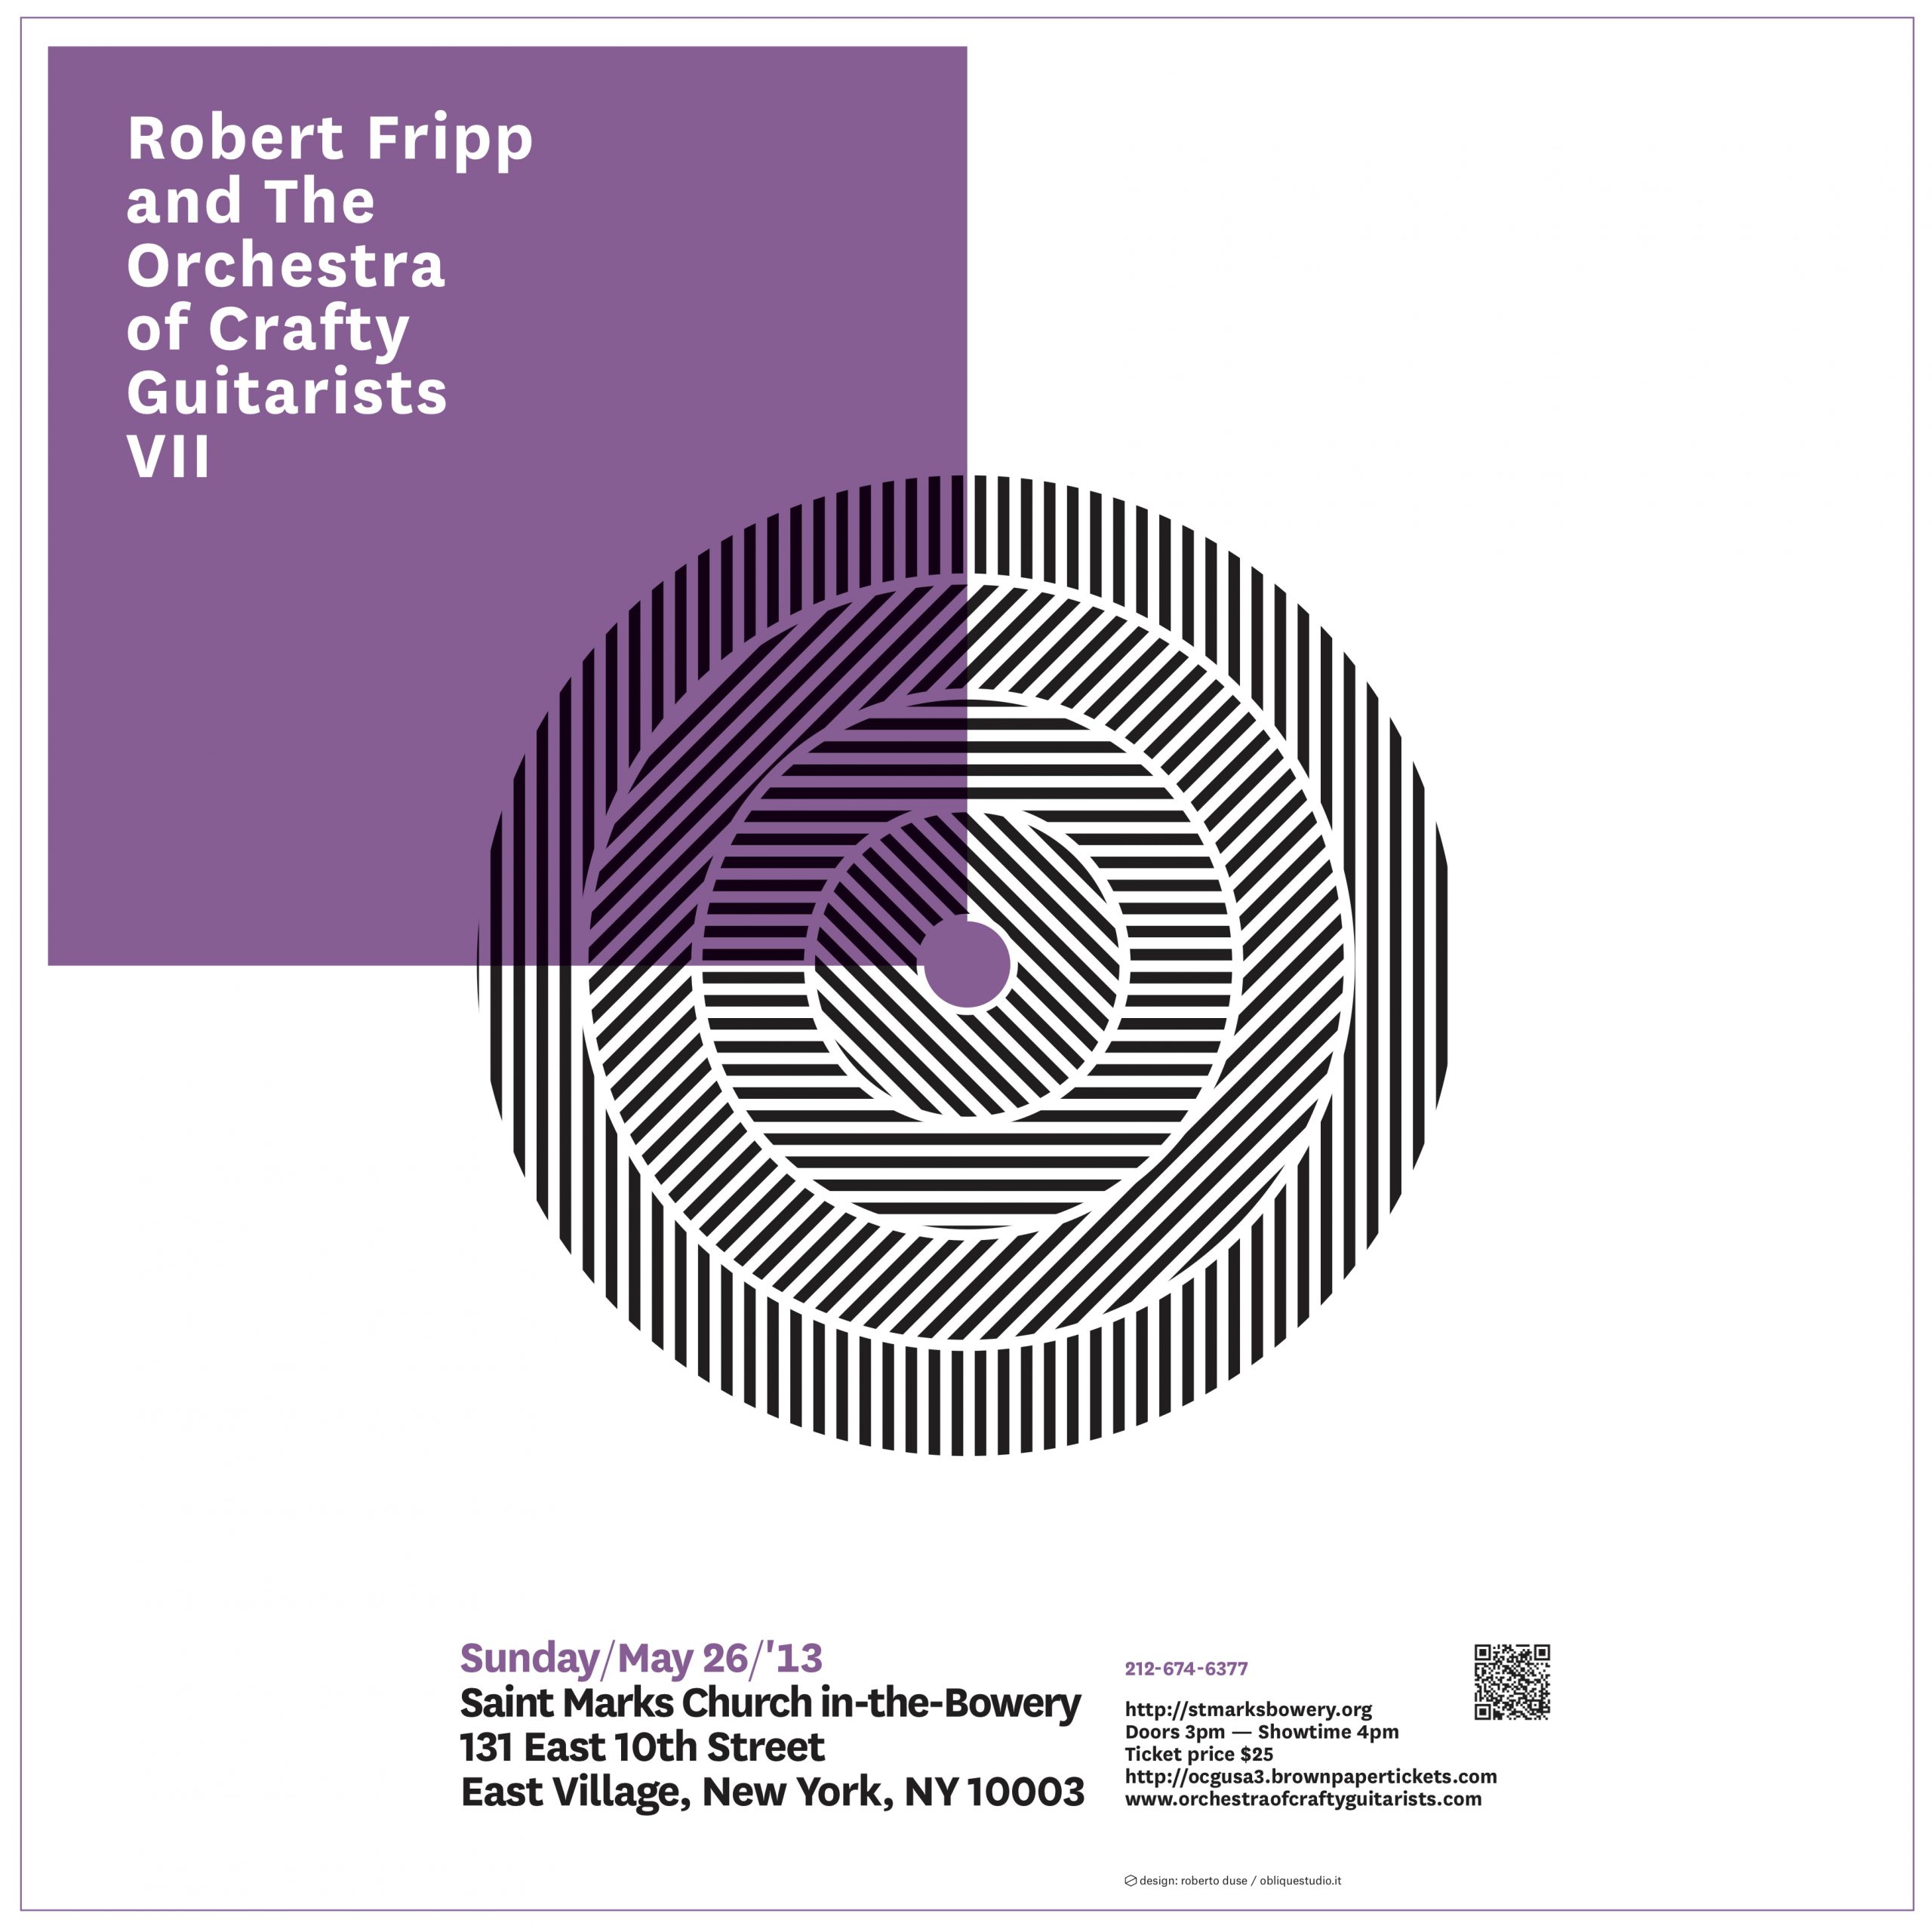 Robert Fripp & The Orchestra Of Crafty Guitarists VII